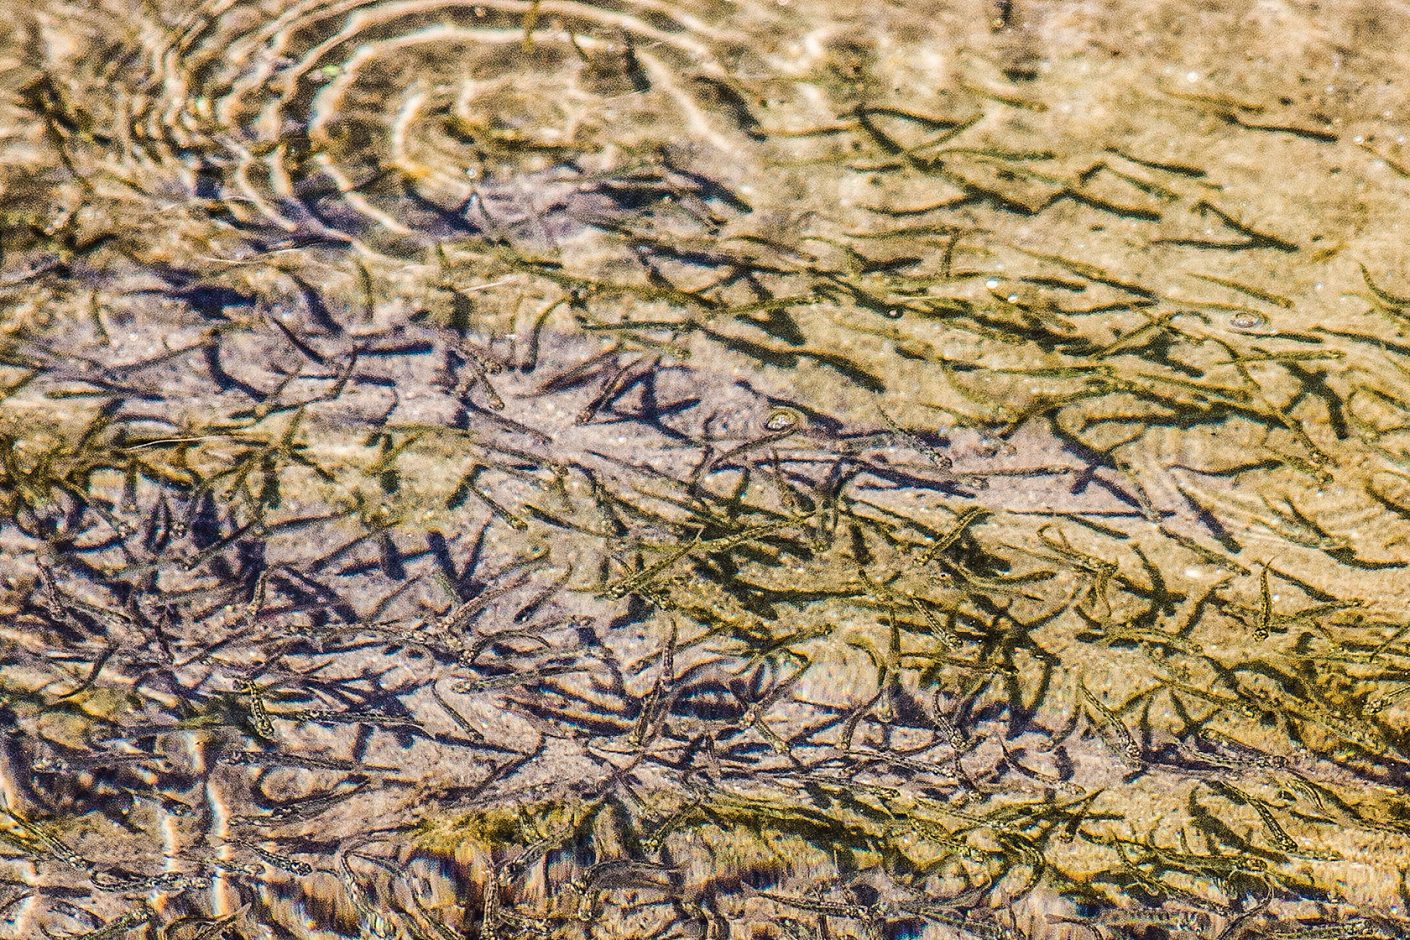 Generally speaking, fry rear along river banks and in shallow eddies (below) where natural elements protect them from predators. Eventually, when the fry migrate, some are haphazardly sucked into stronger currents where fish like big rainbows (right) are waiting for an easy meal. (photo by Will Rice)